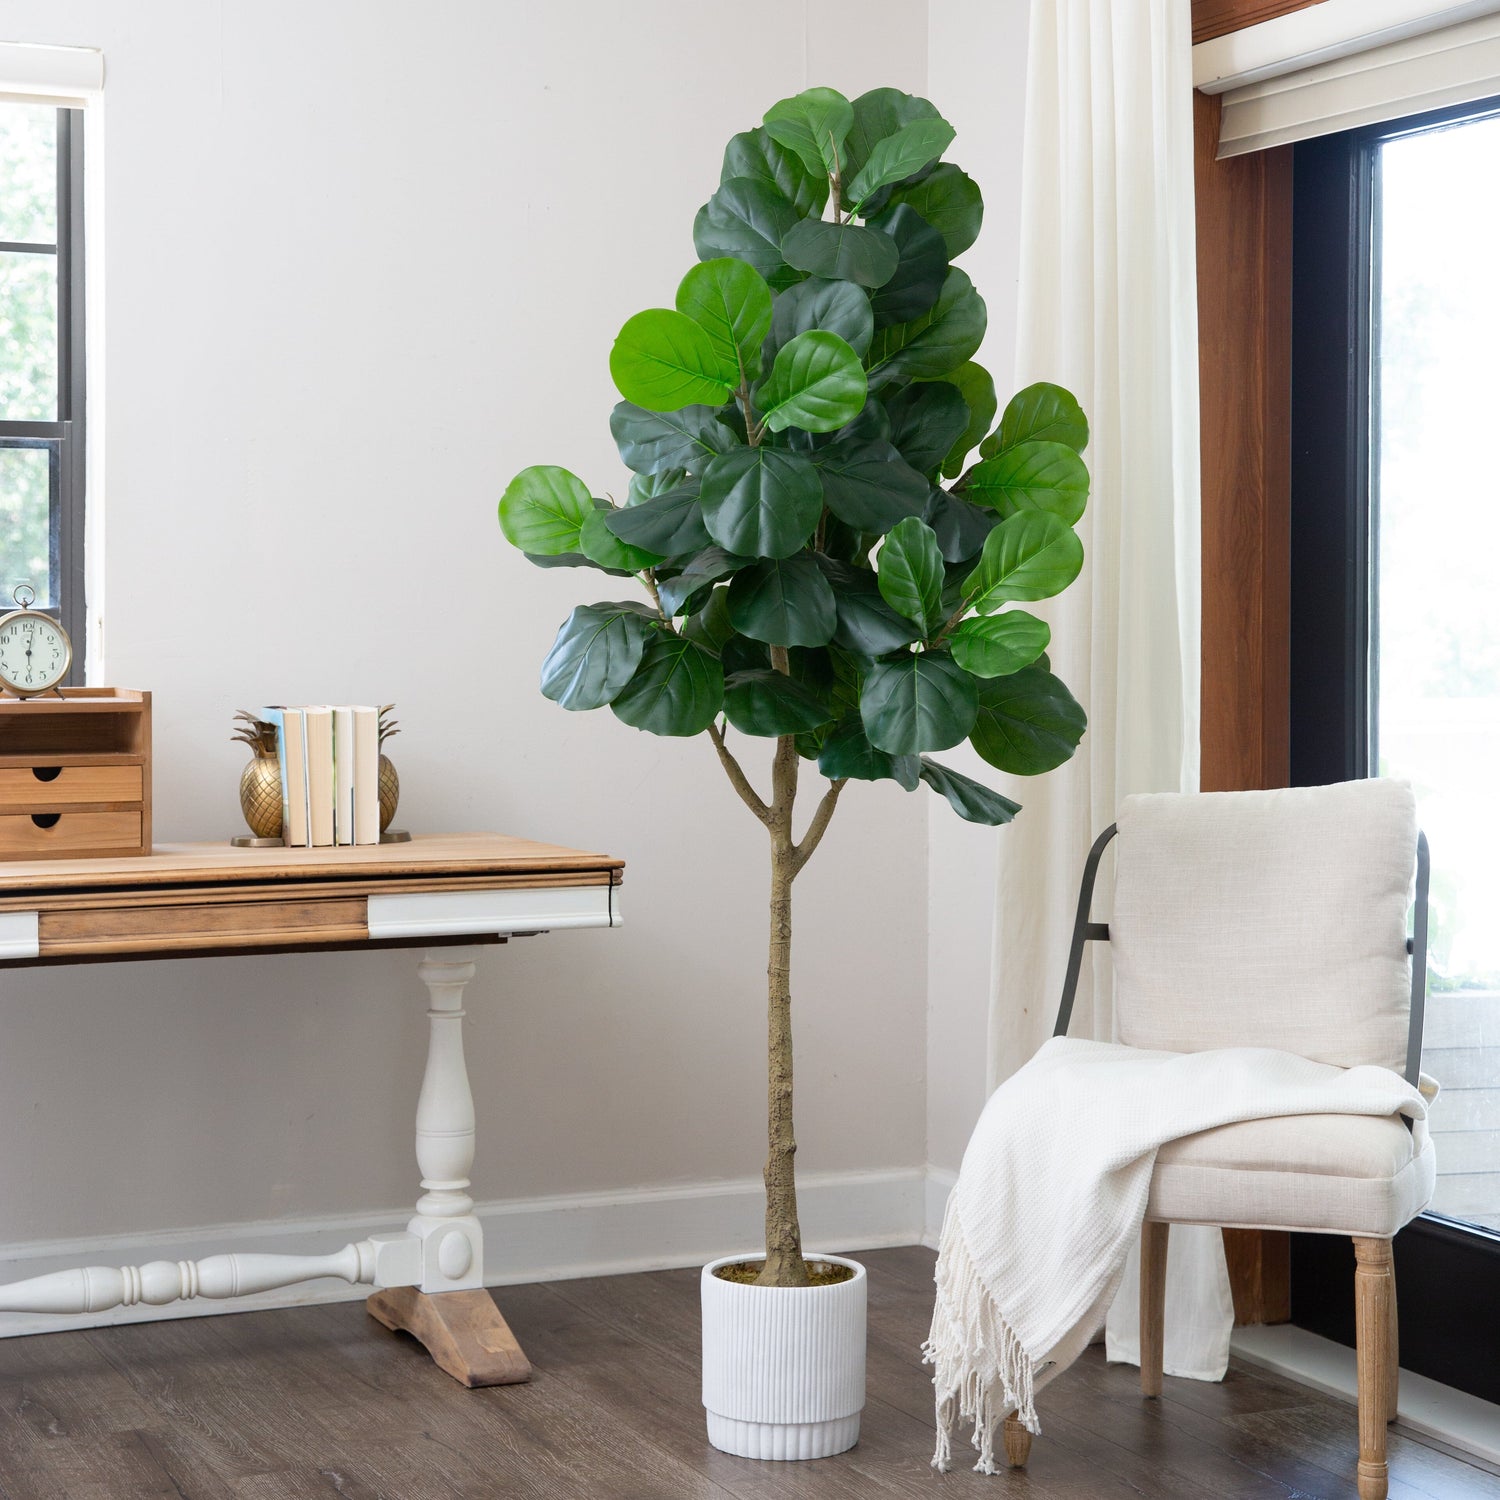 6’ Artificial Fiddle Leaf Fig Tree with White Decorative Planter